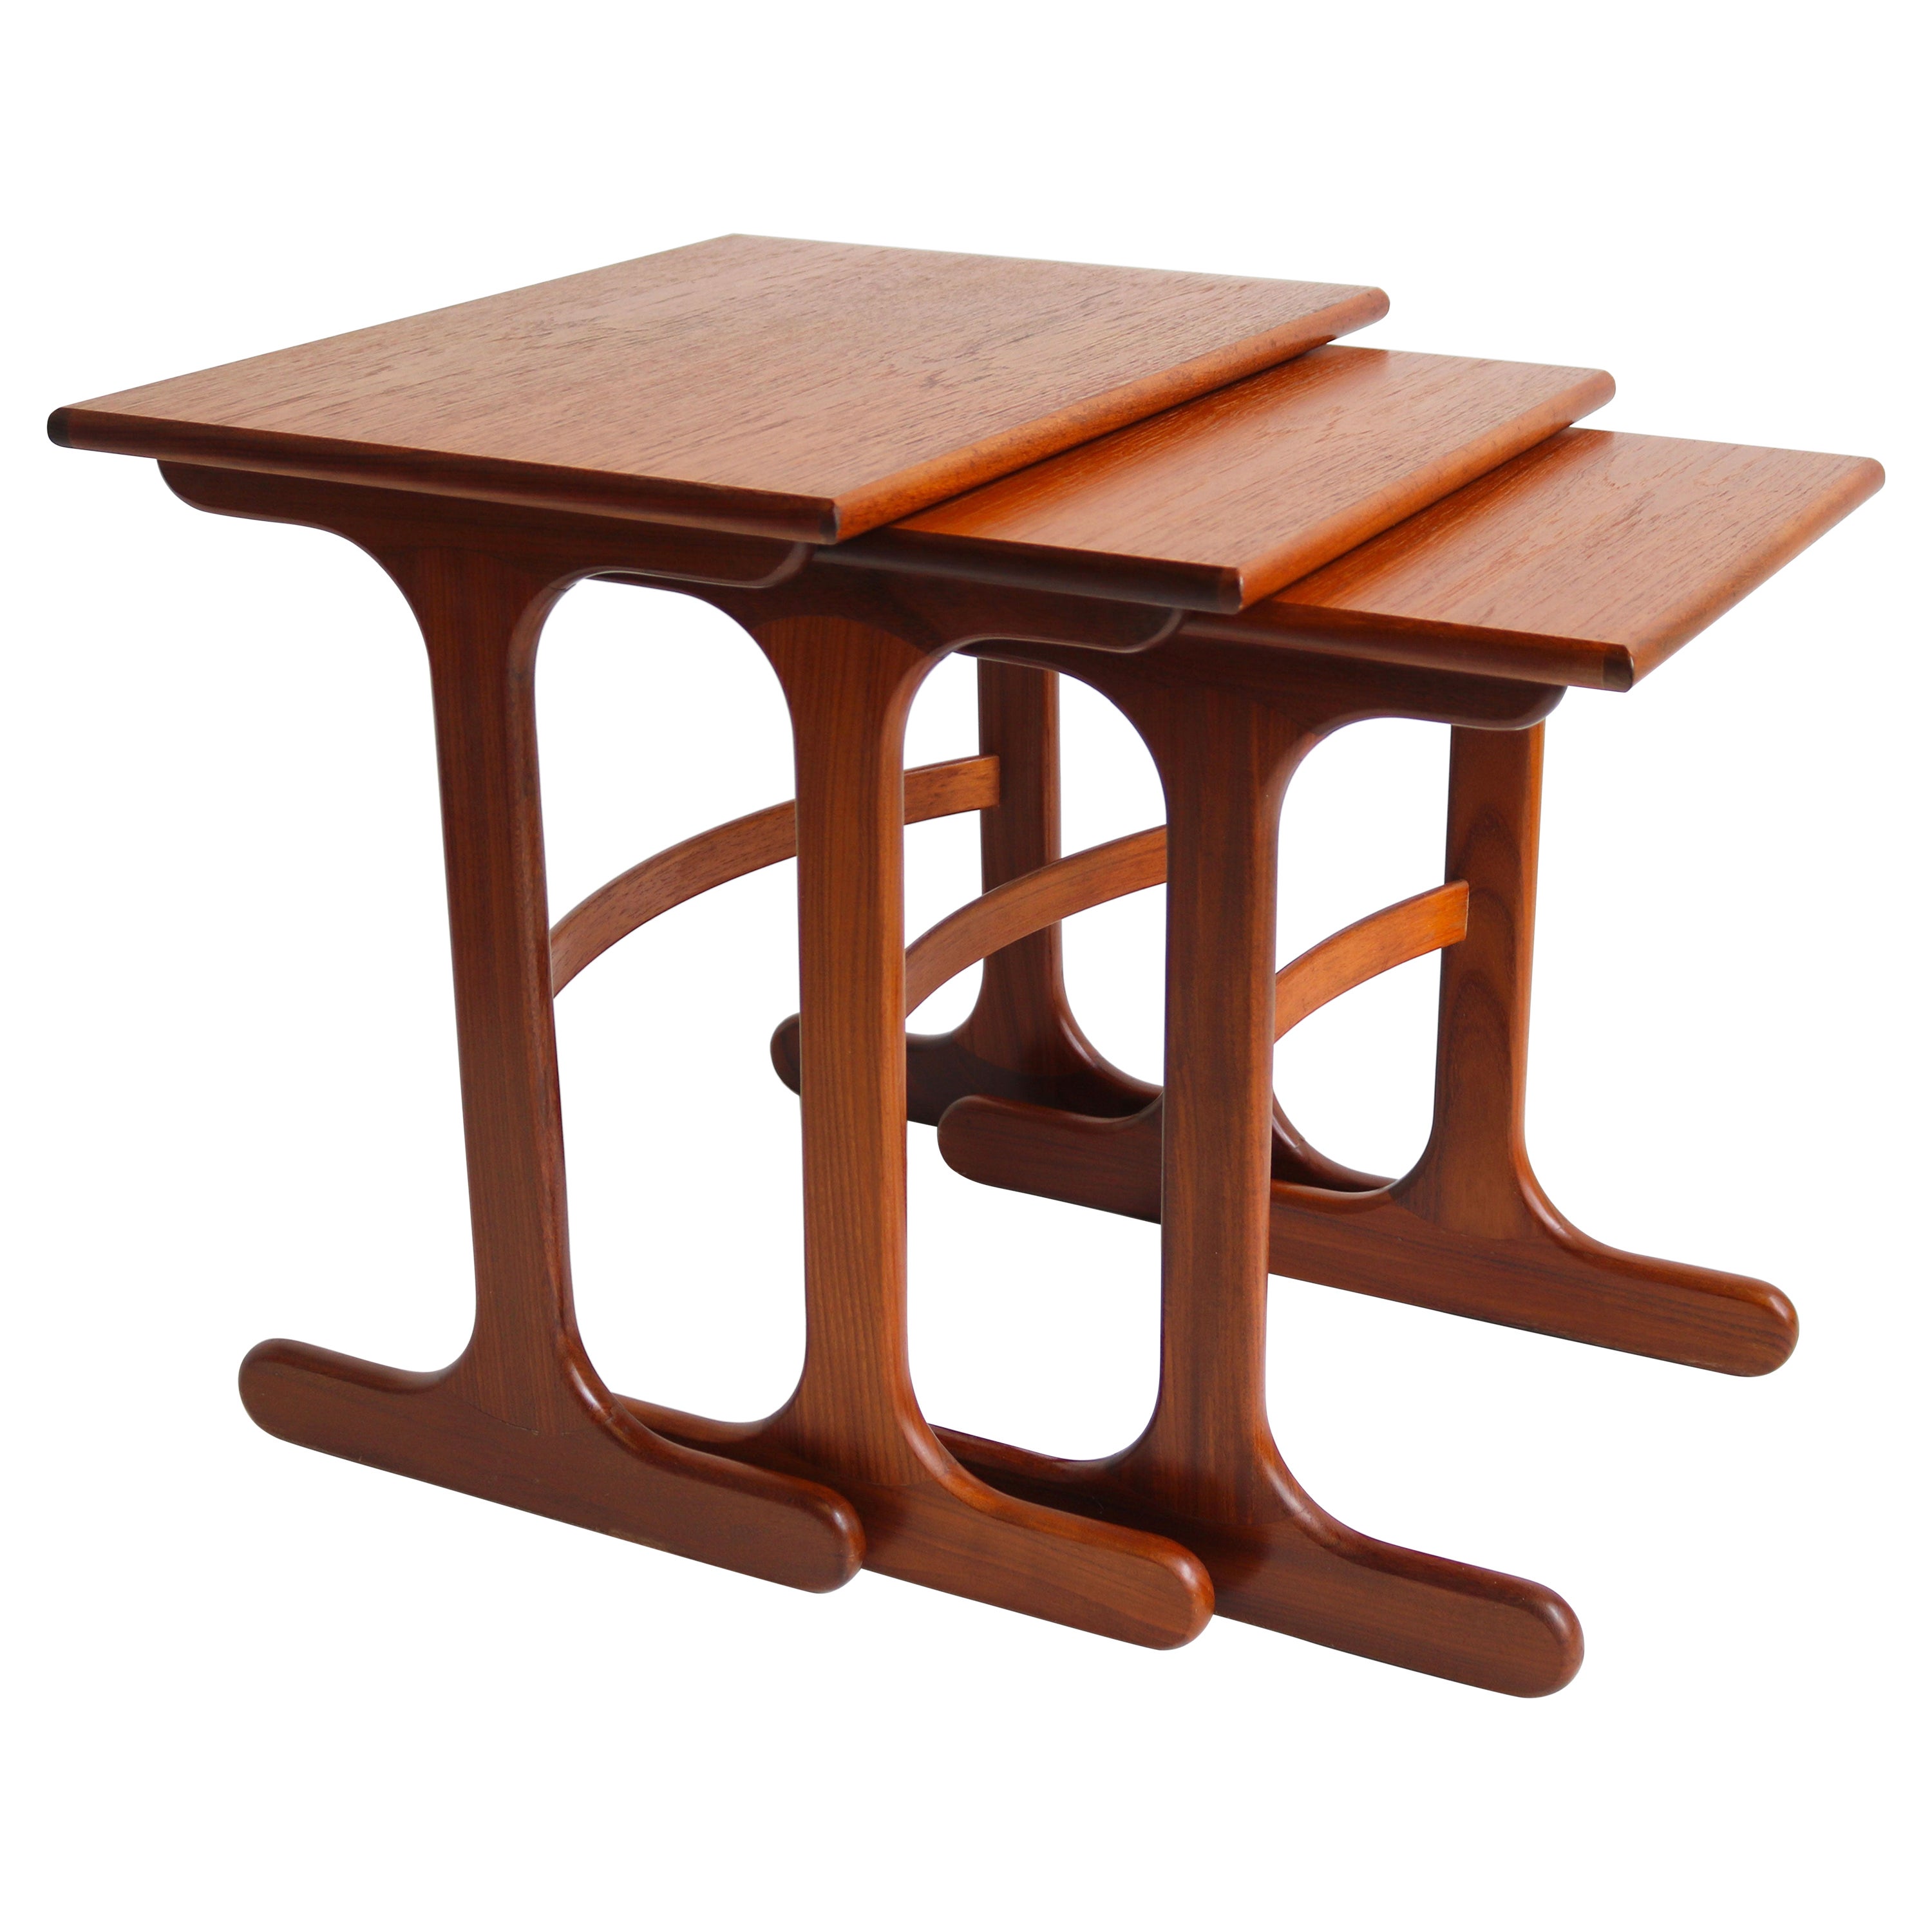 Mid-Century Modern Design Nesting Tables by G-Plan 1960 Teak Stacking Tables For Sale